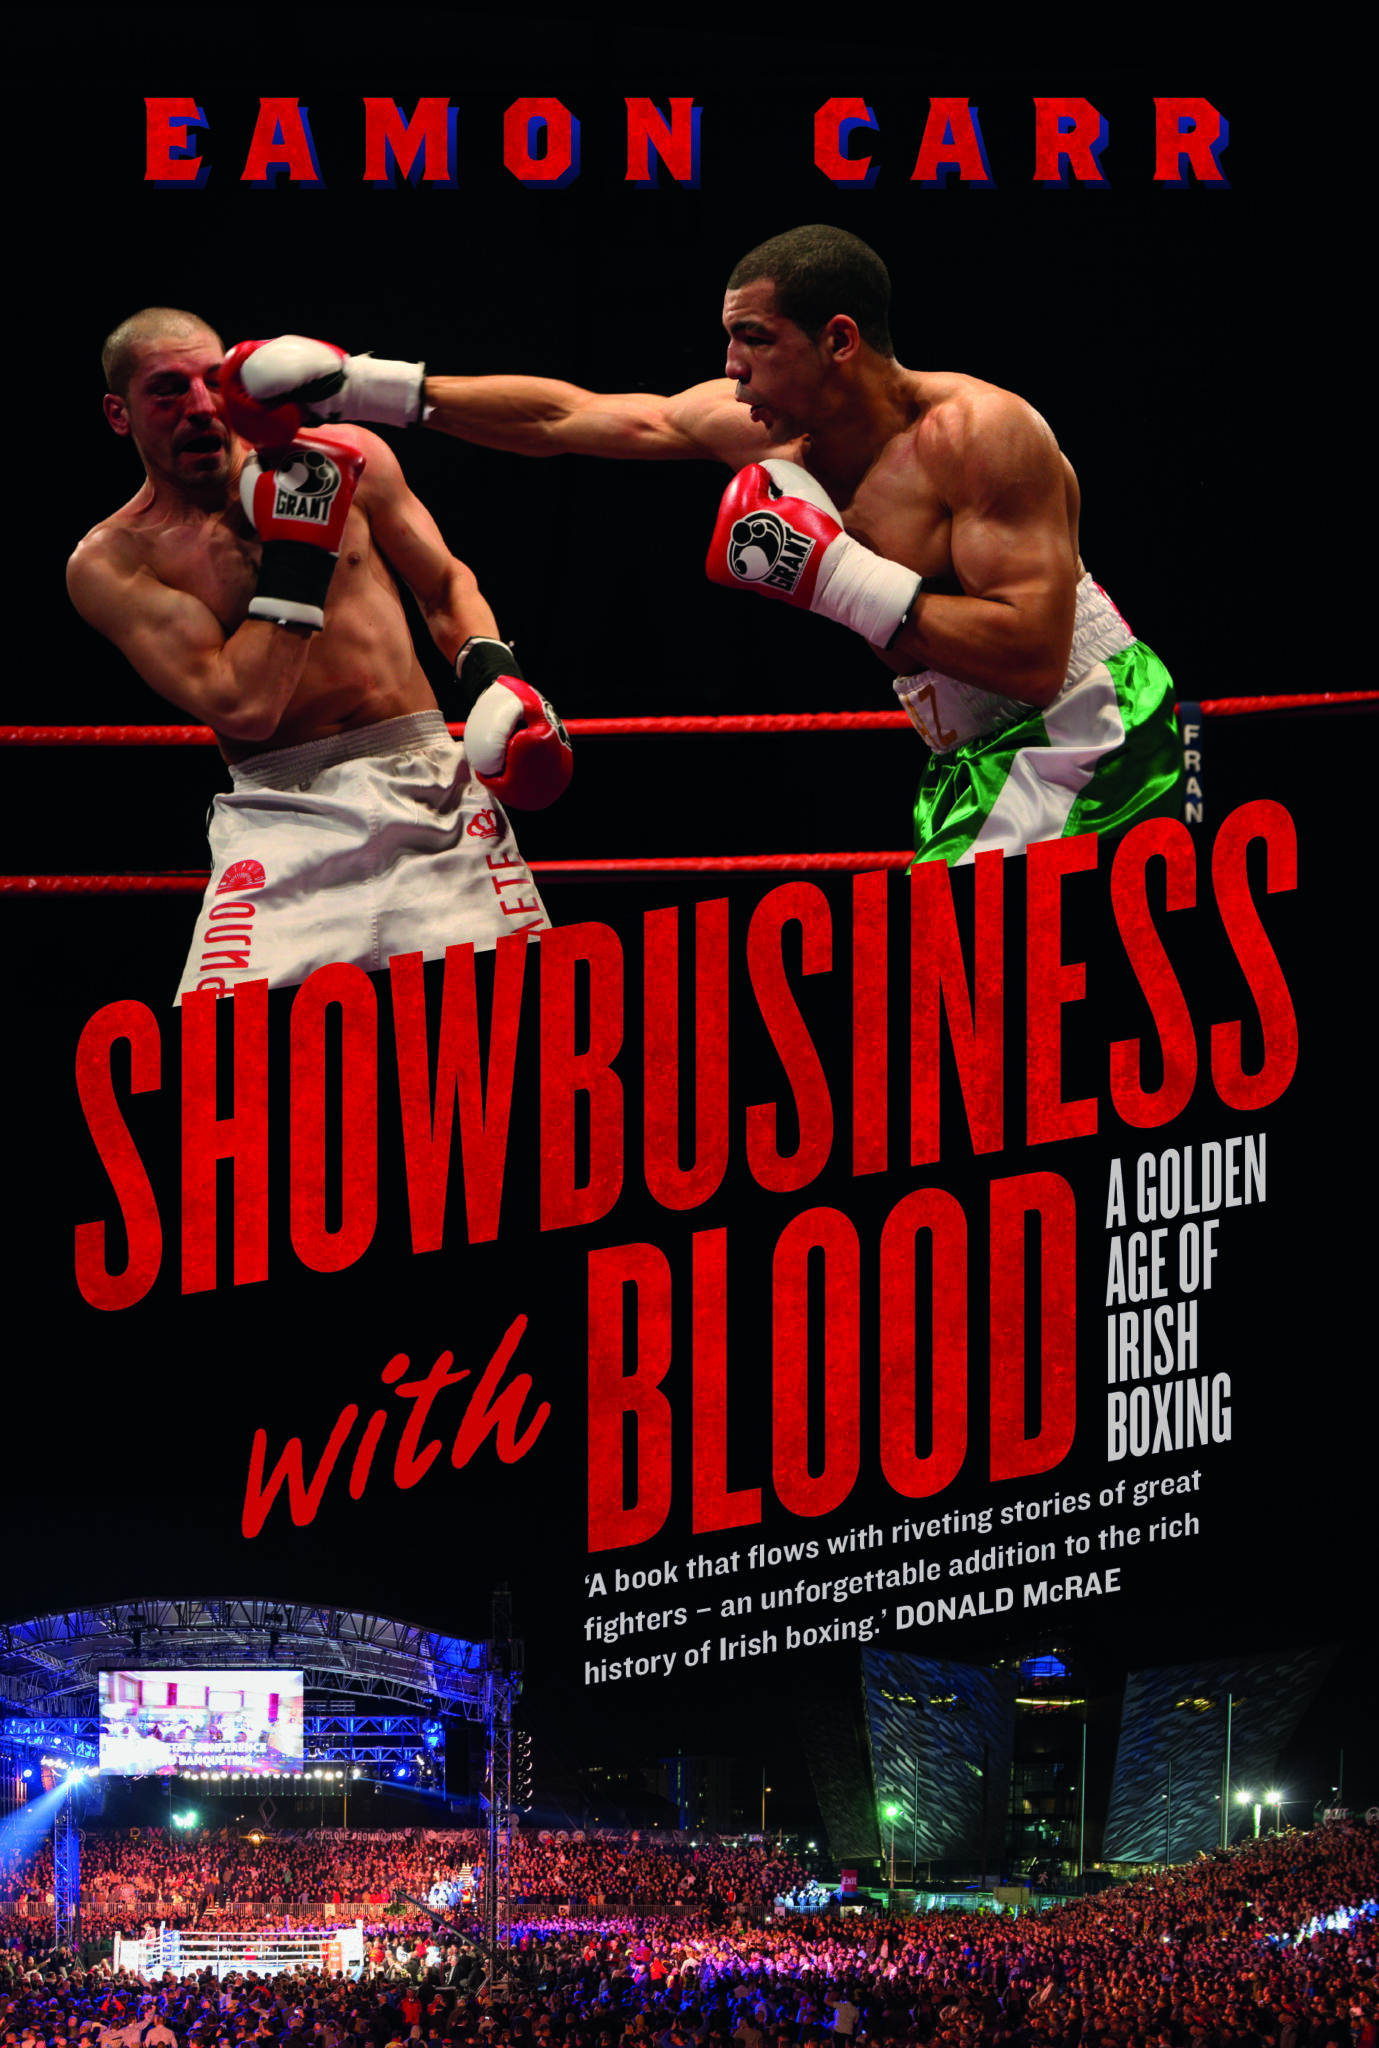 Showbusiness With Blood by Eamon Carr